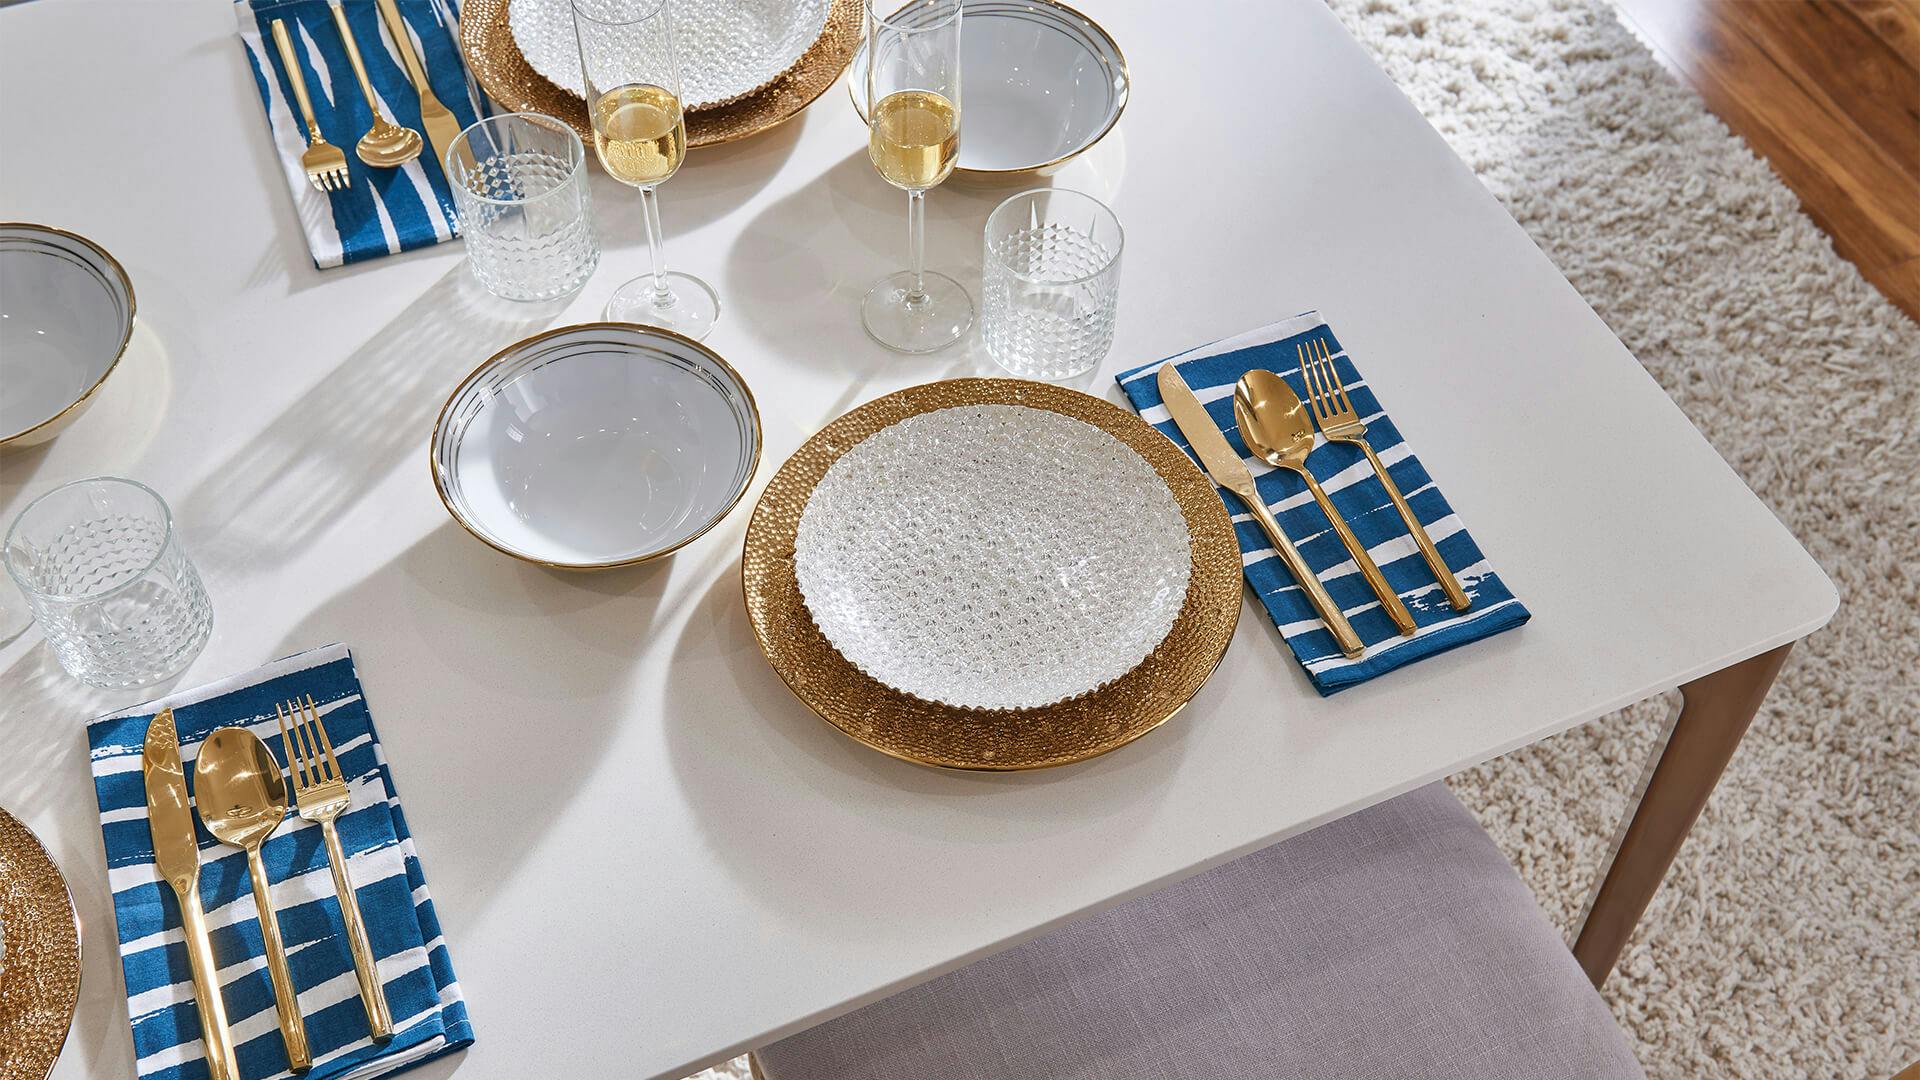 Table setting with white plates accented by gold flatware atop deep blue napkins and a bright wine